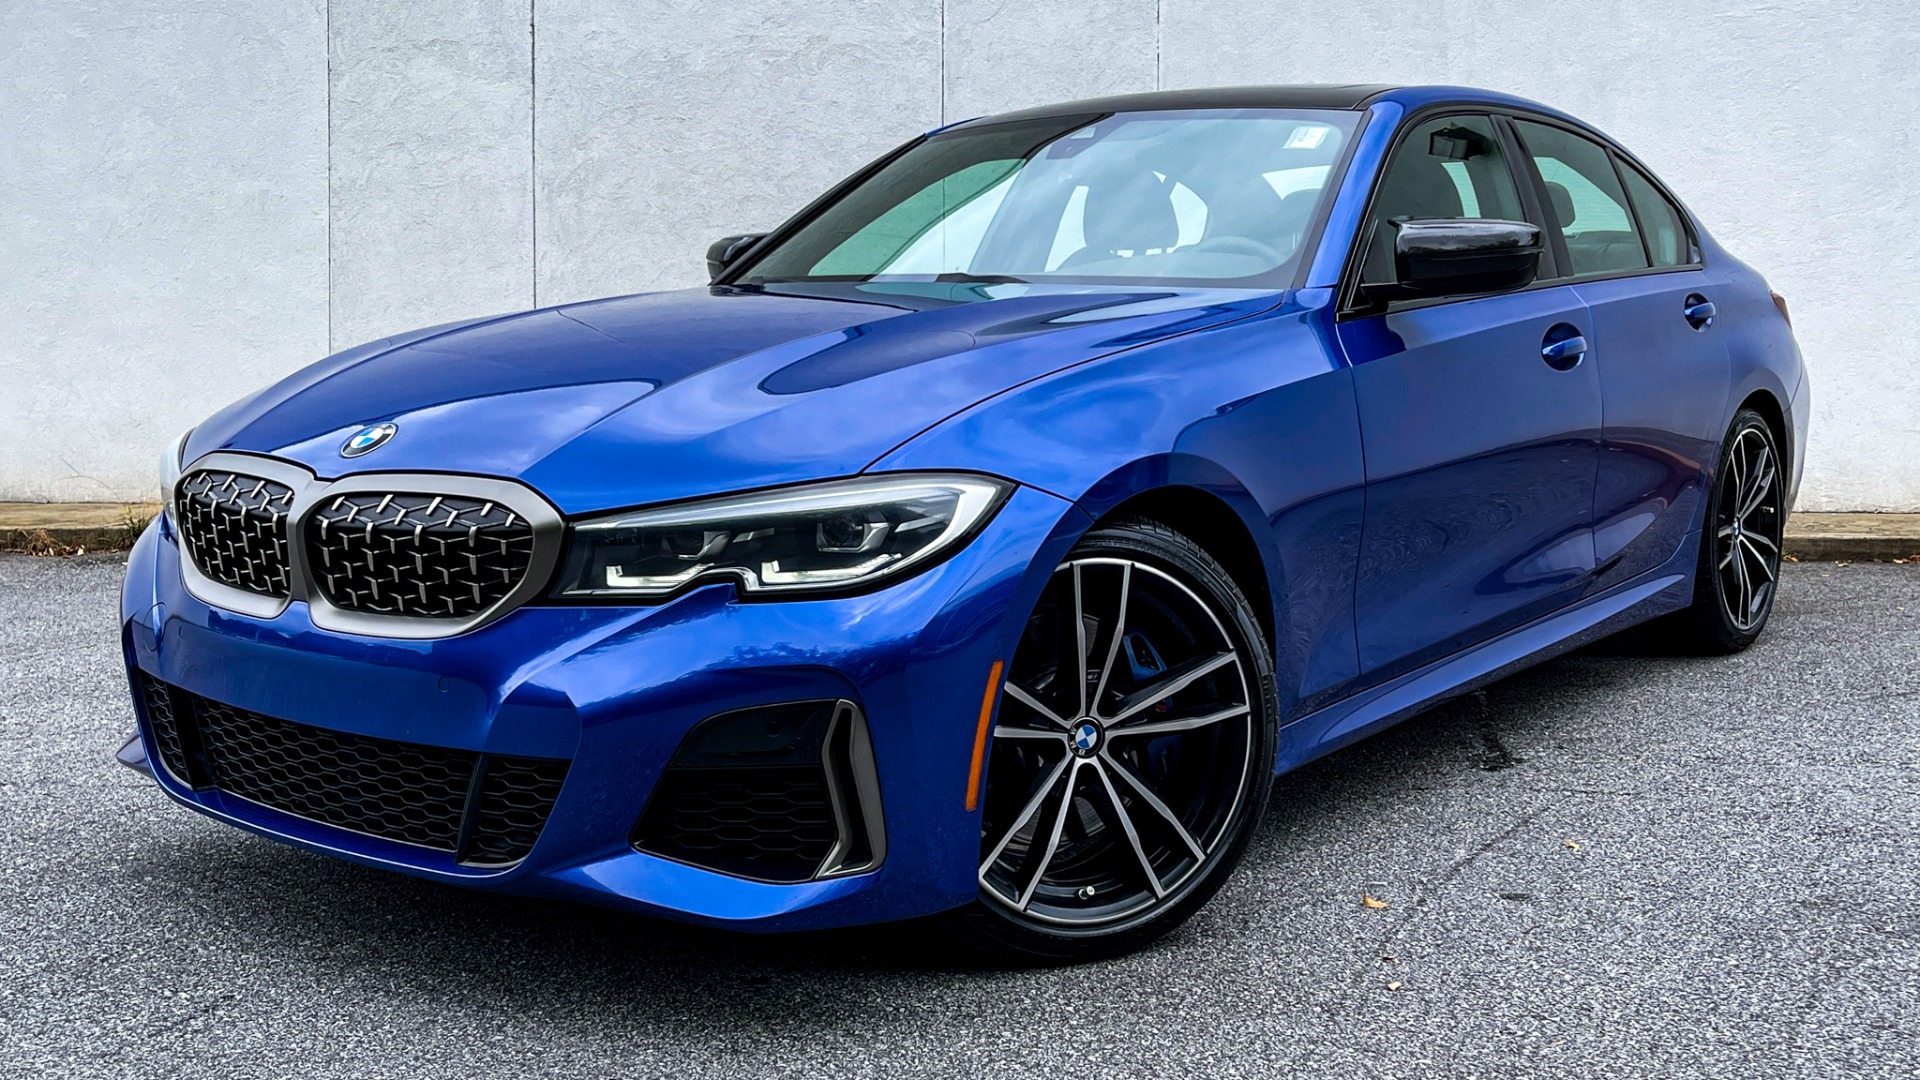 Used 2021 BMW 3 Series M340i / REMOTE START / DRIVING ASSISTANCE / 19IN WHEELS / INTAKE SYSTEM for sale Sold at Formula Imports in Charlotte NC 28227 1